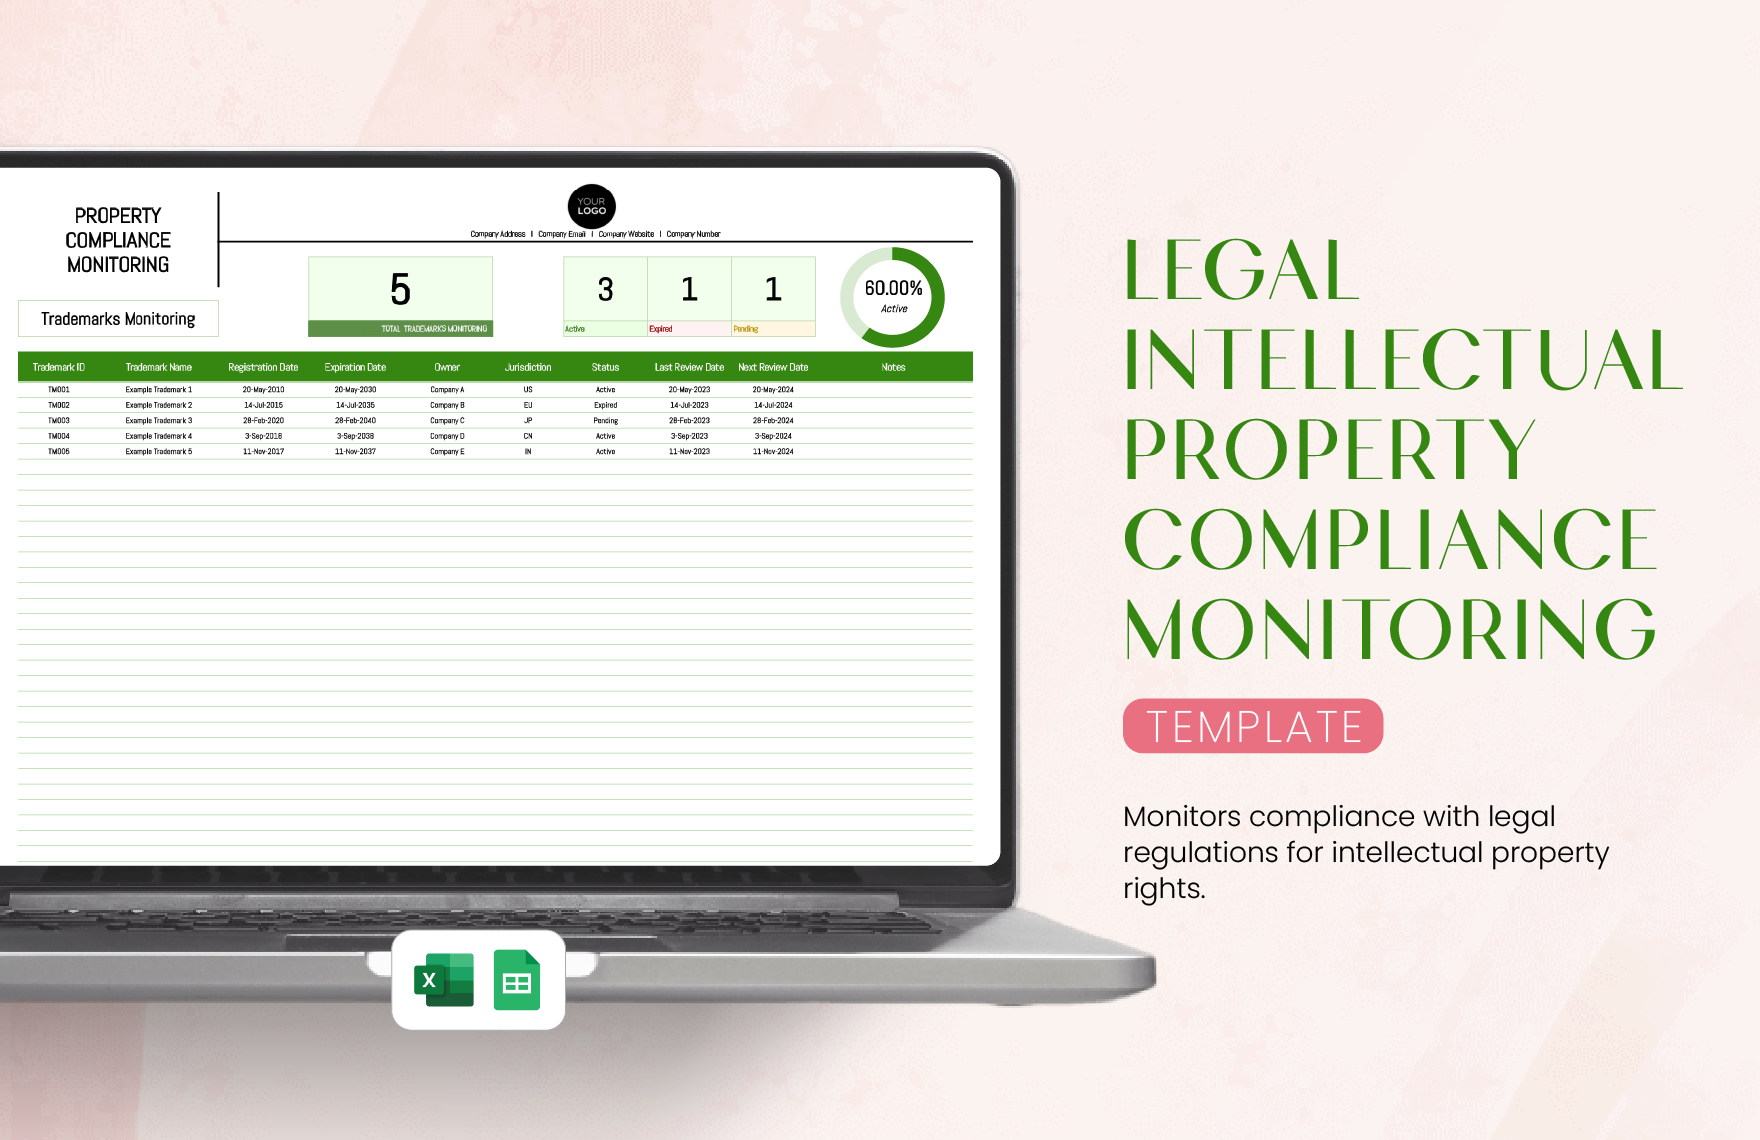 Legal Intellectual Property Compliance Monitoring Template in Excel, Google Sheets